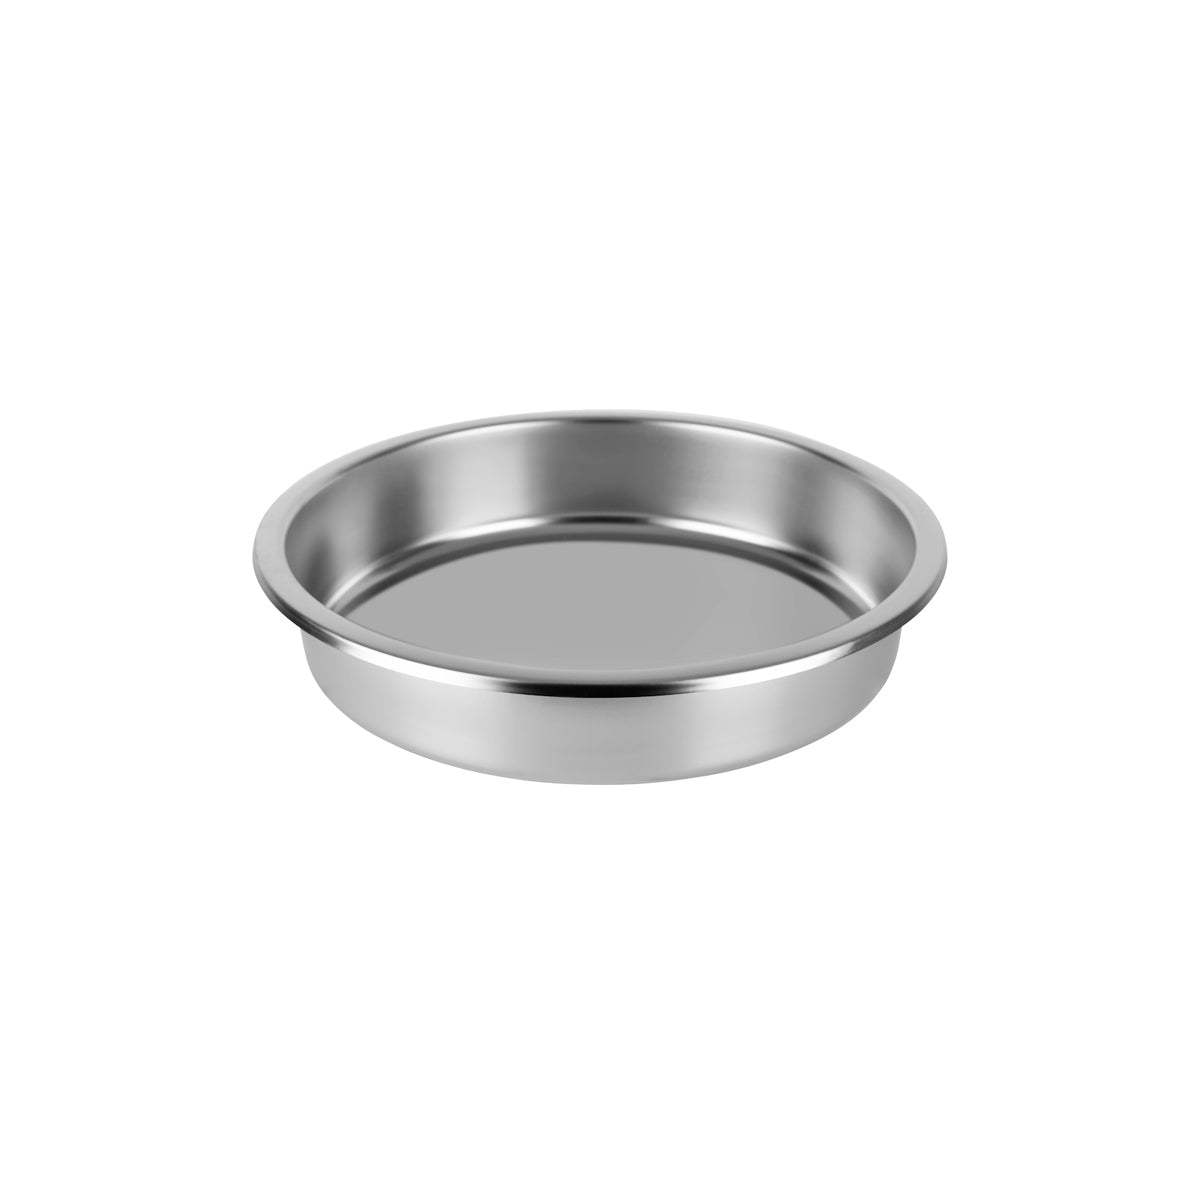 54905-I Chef Inox Round Insert Pan Stainless Steel to Suit 54905 Tomkin Australia Hospitality Supplies